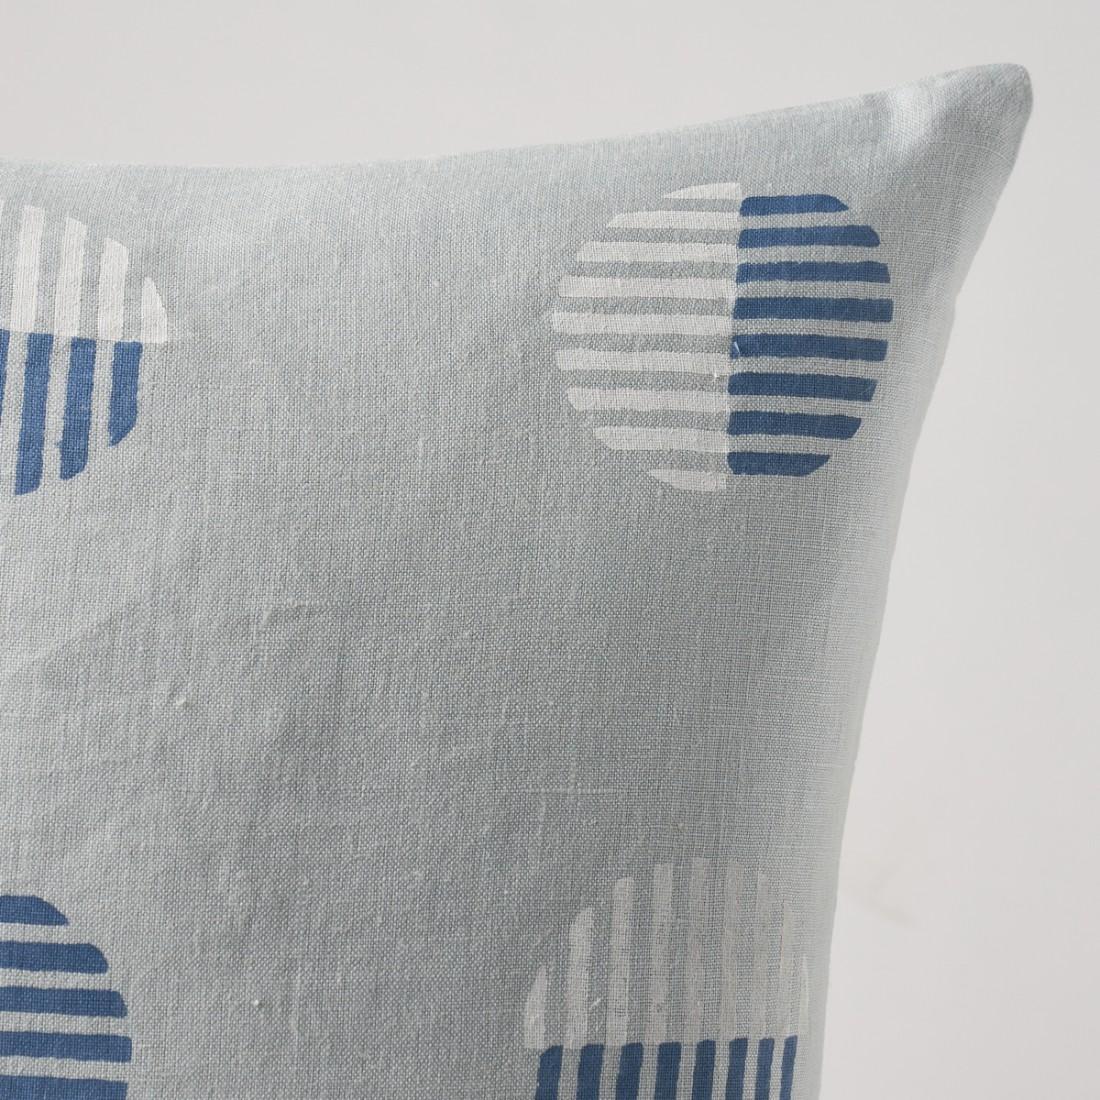 This pillow features Ando Block Print with a knife edge finish. A soft yet contemporary design, Ando Hand-Block Print in ivory & charcoal-on-natural features a unique geometric pattern composed of bisected circles with two-tone stripes. Pillow